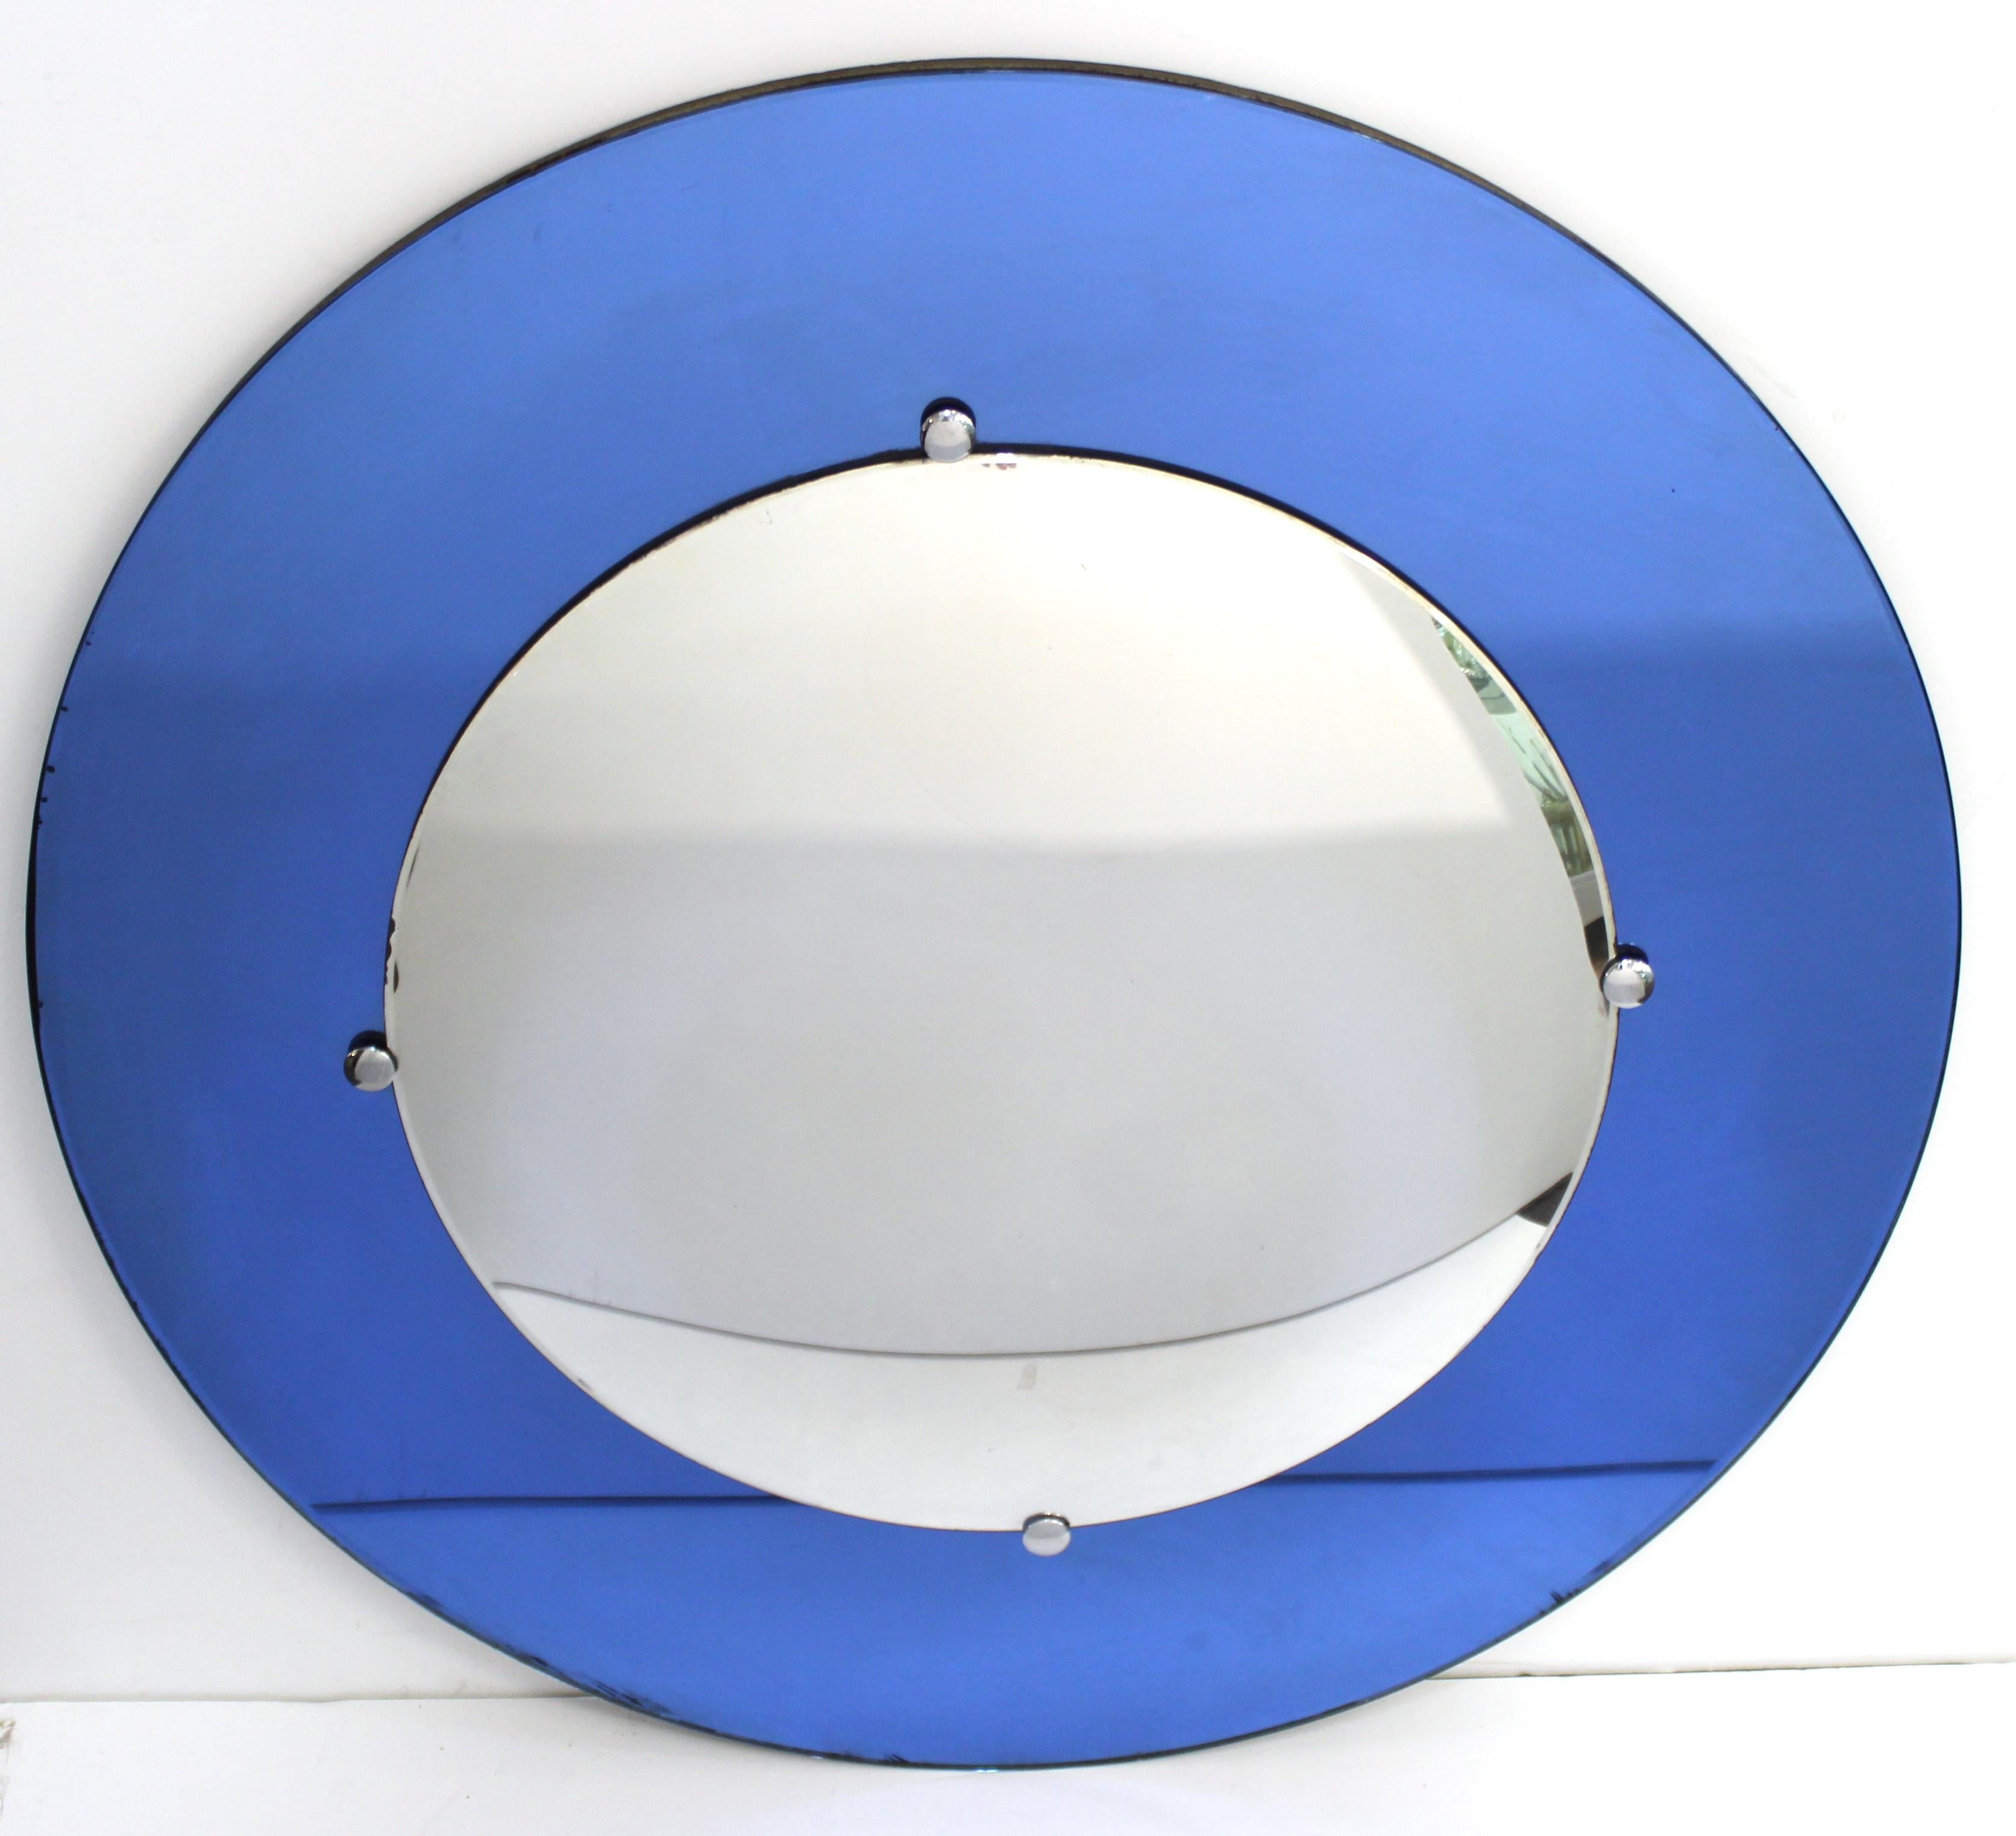 American Art Deco period circular mirror with a convex clear mirror in the center, atop blue flat mirrored background border. The mirror is mounted on a wooden back and was likely made during the 1930s. In great vintage condition with